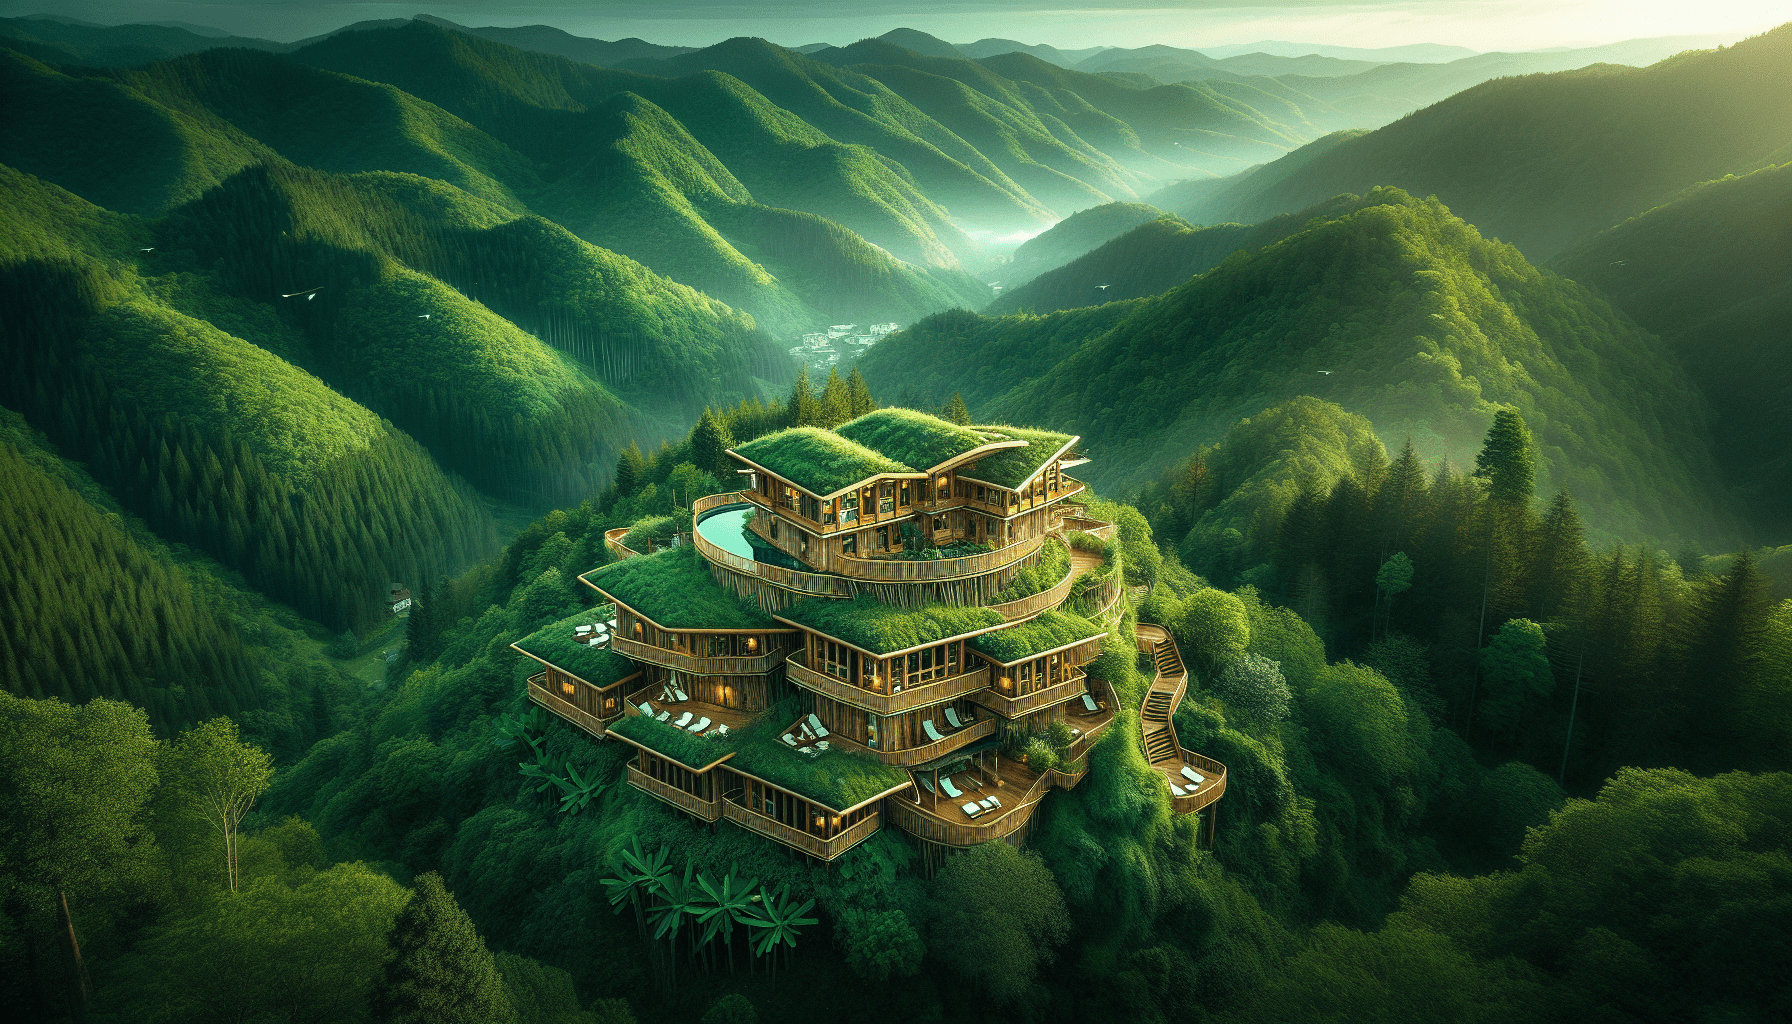 An expansive, multi-level wooden mansion with green rooftops is nestled atop a forested hill, surrounded by misty, rolling mountains. Pools and terraces are incorporated into the structure.